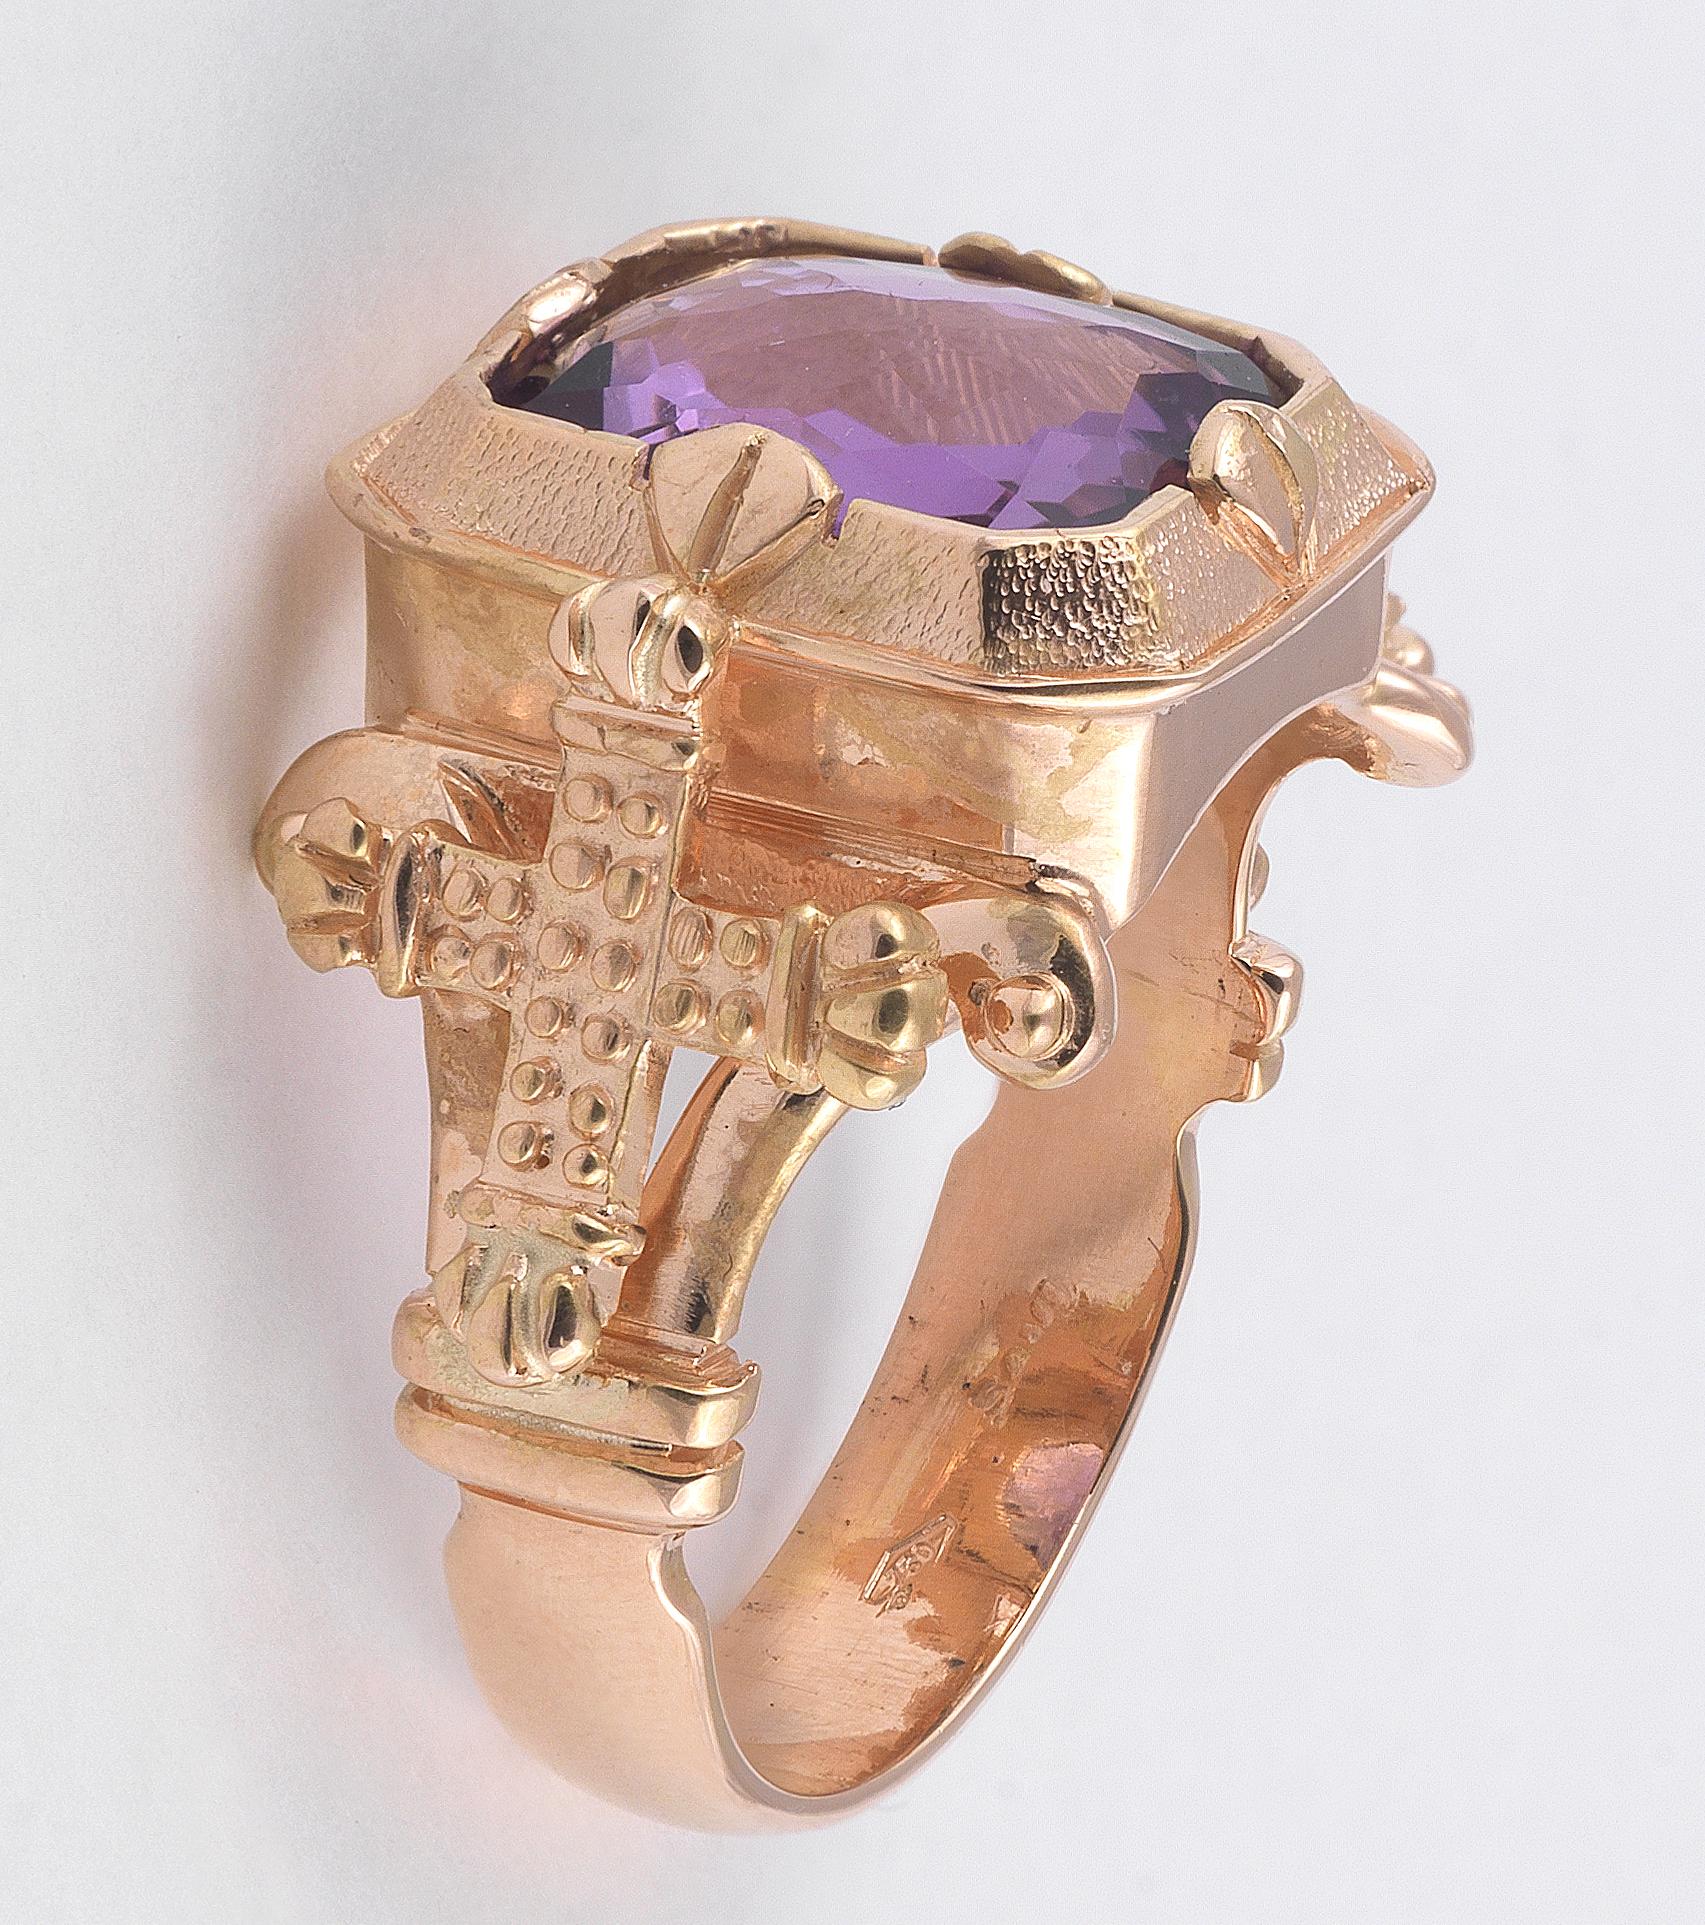 BERNARDO ANTICHITÀ PONTE VECCHIO FLORENCE 

The Siberian Amethyst of which is only seen in Royal Regalia. 18kt Rose Gold mount with a Cross on each shoulder and in oval recesses.
Size : 11
Weight:17,2gr.